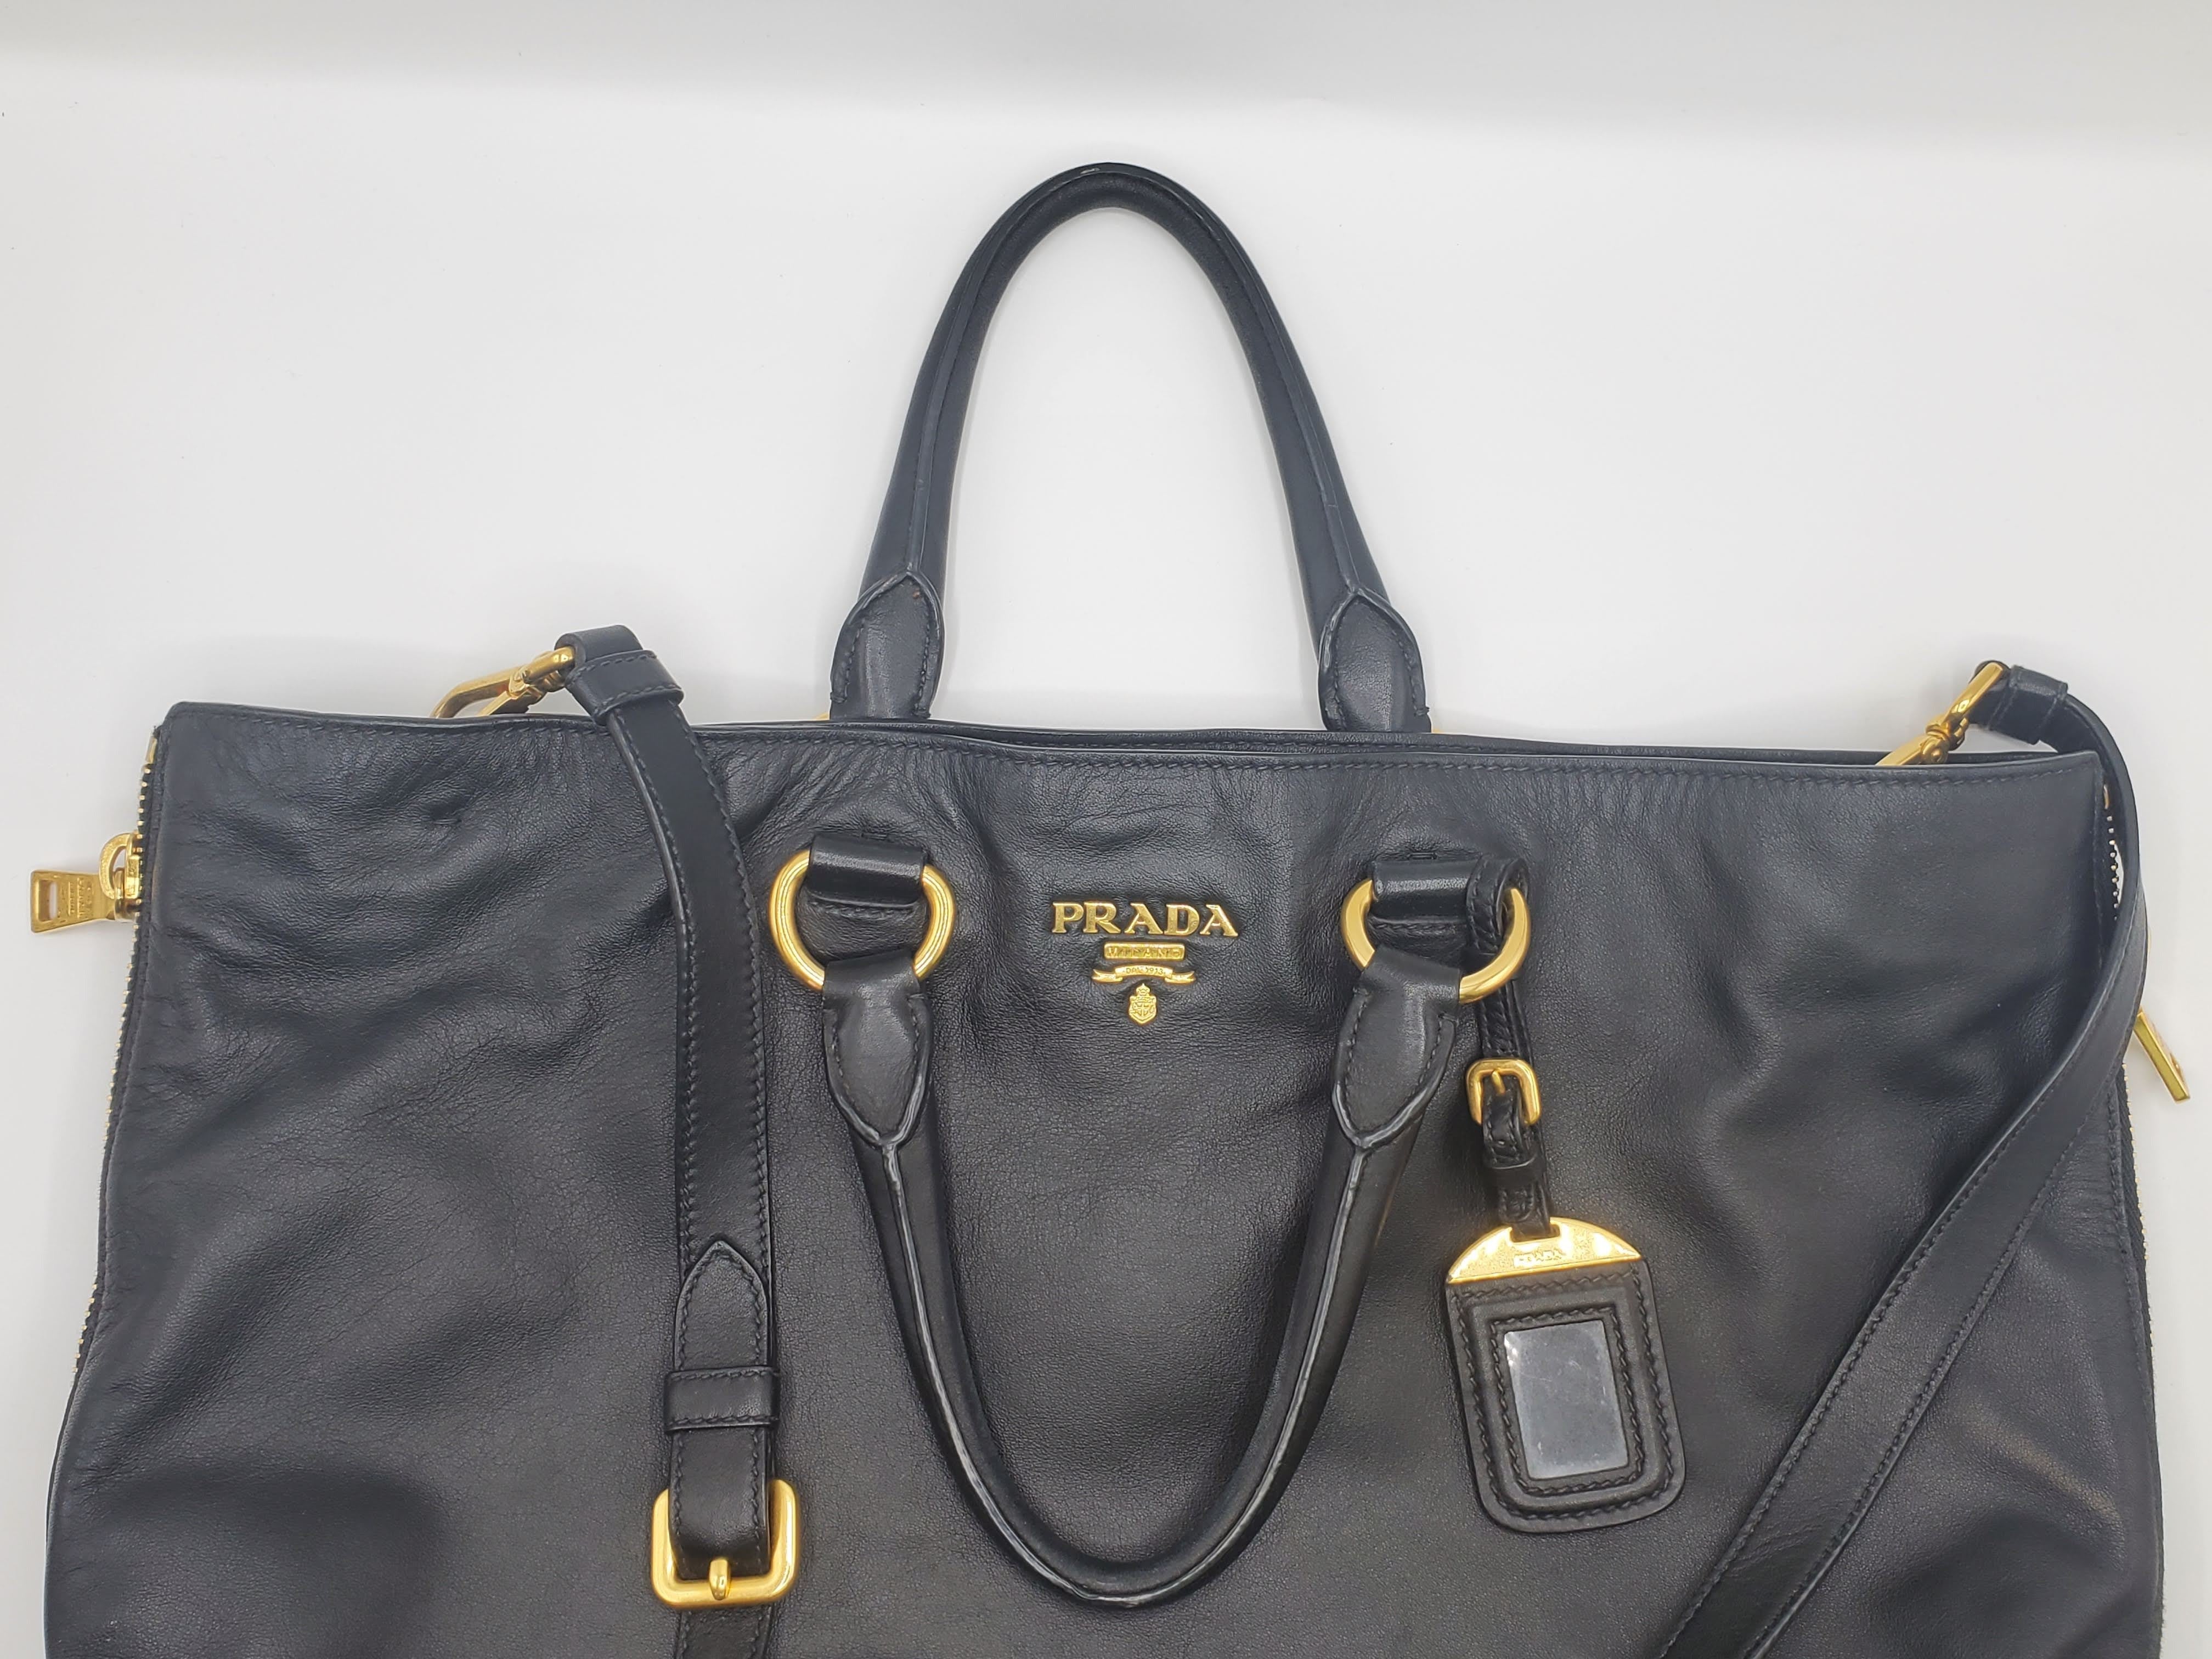 Women's Black Shopping Tote Bag with Gold Hardware